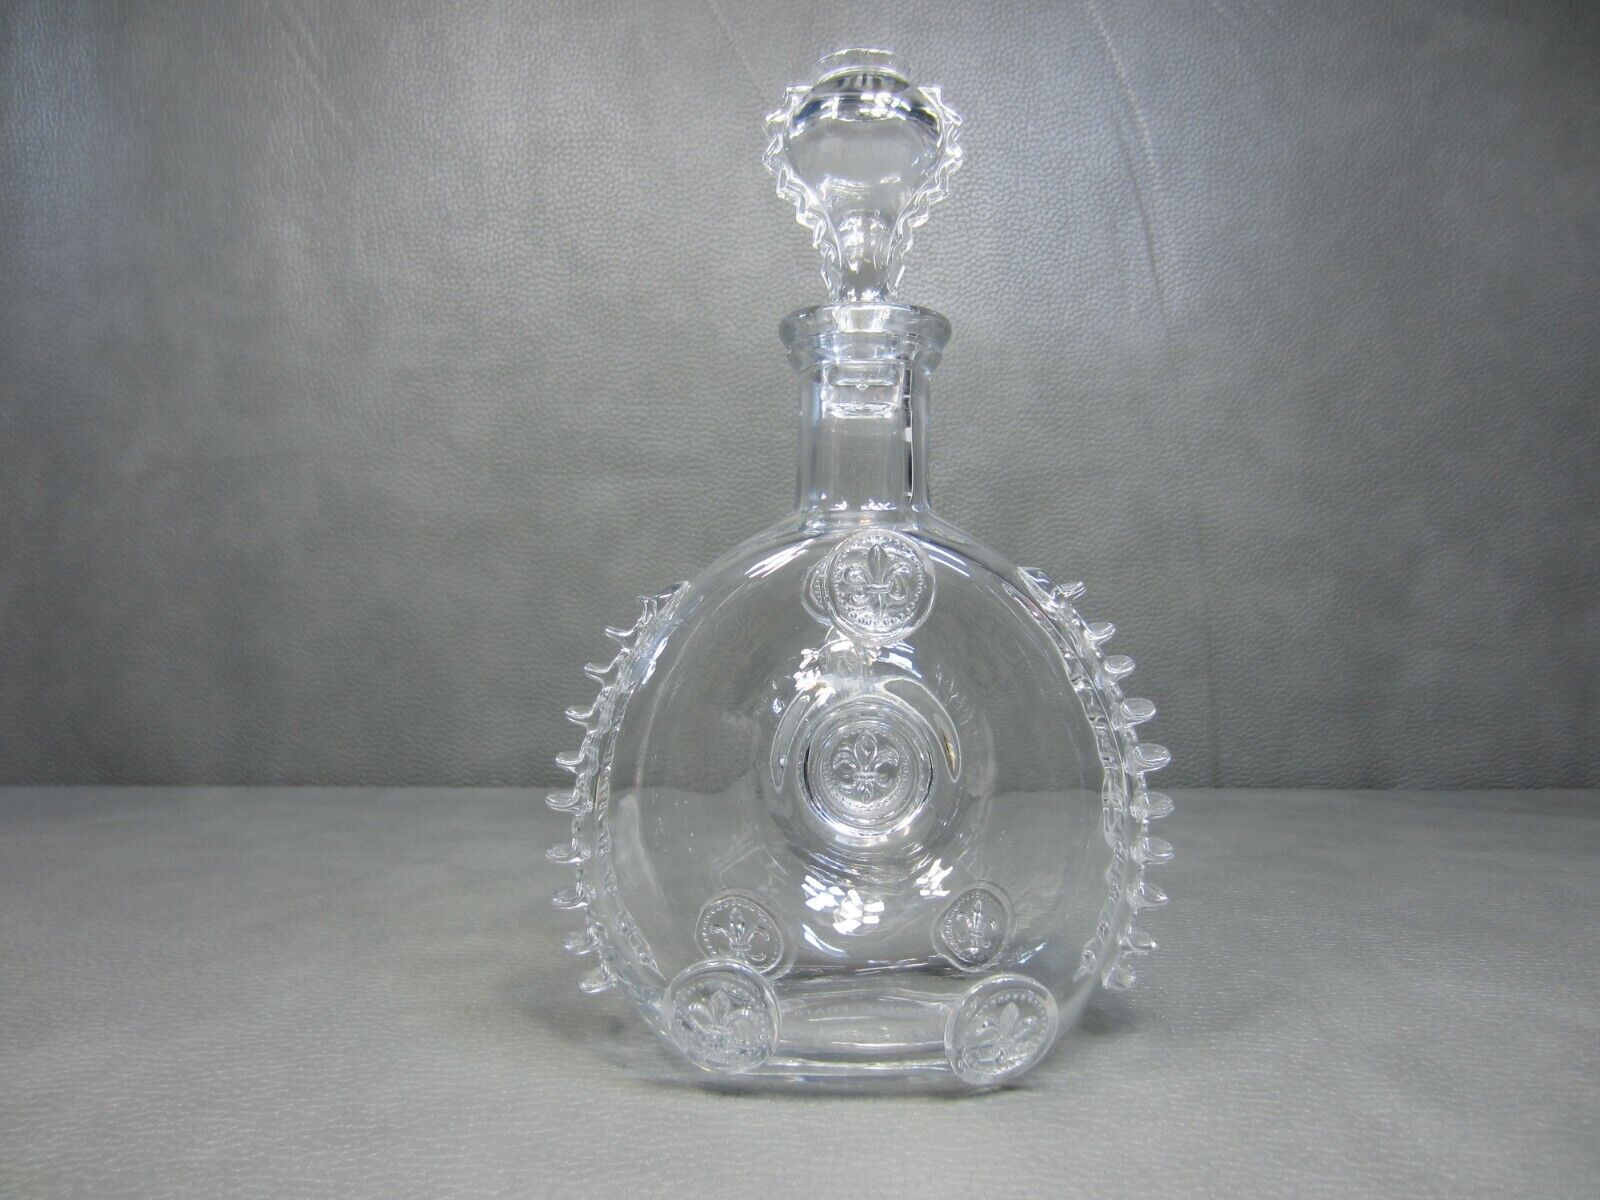 Remy Martin Louis XIII Cognac Baccarat Crystal Decanter 